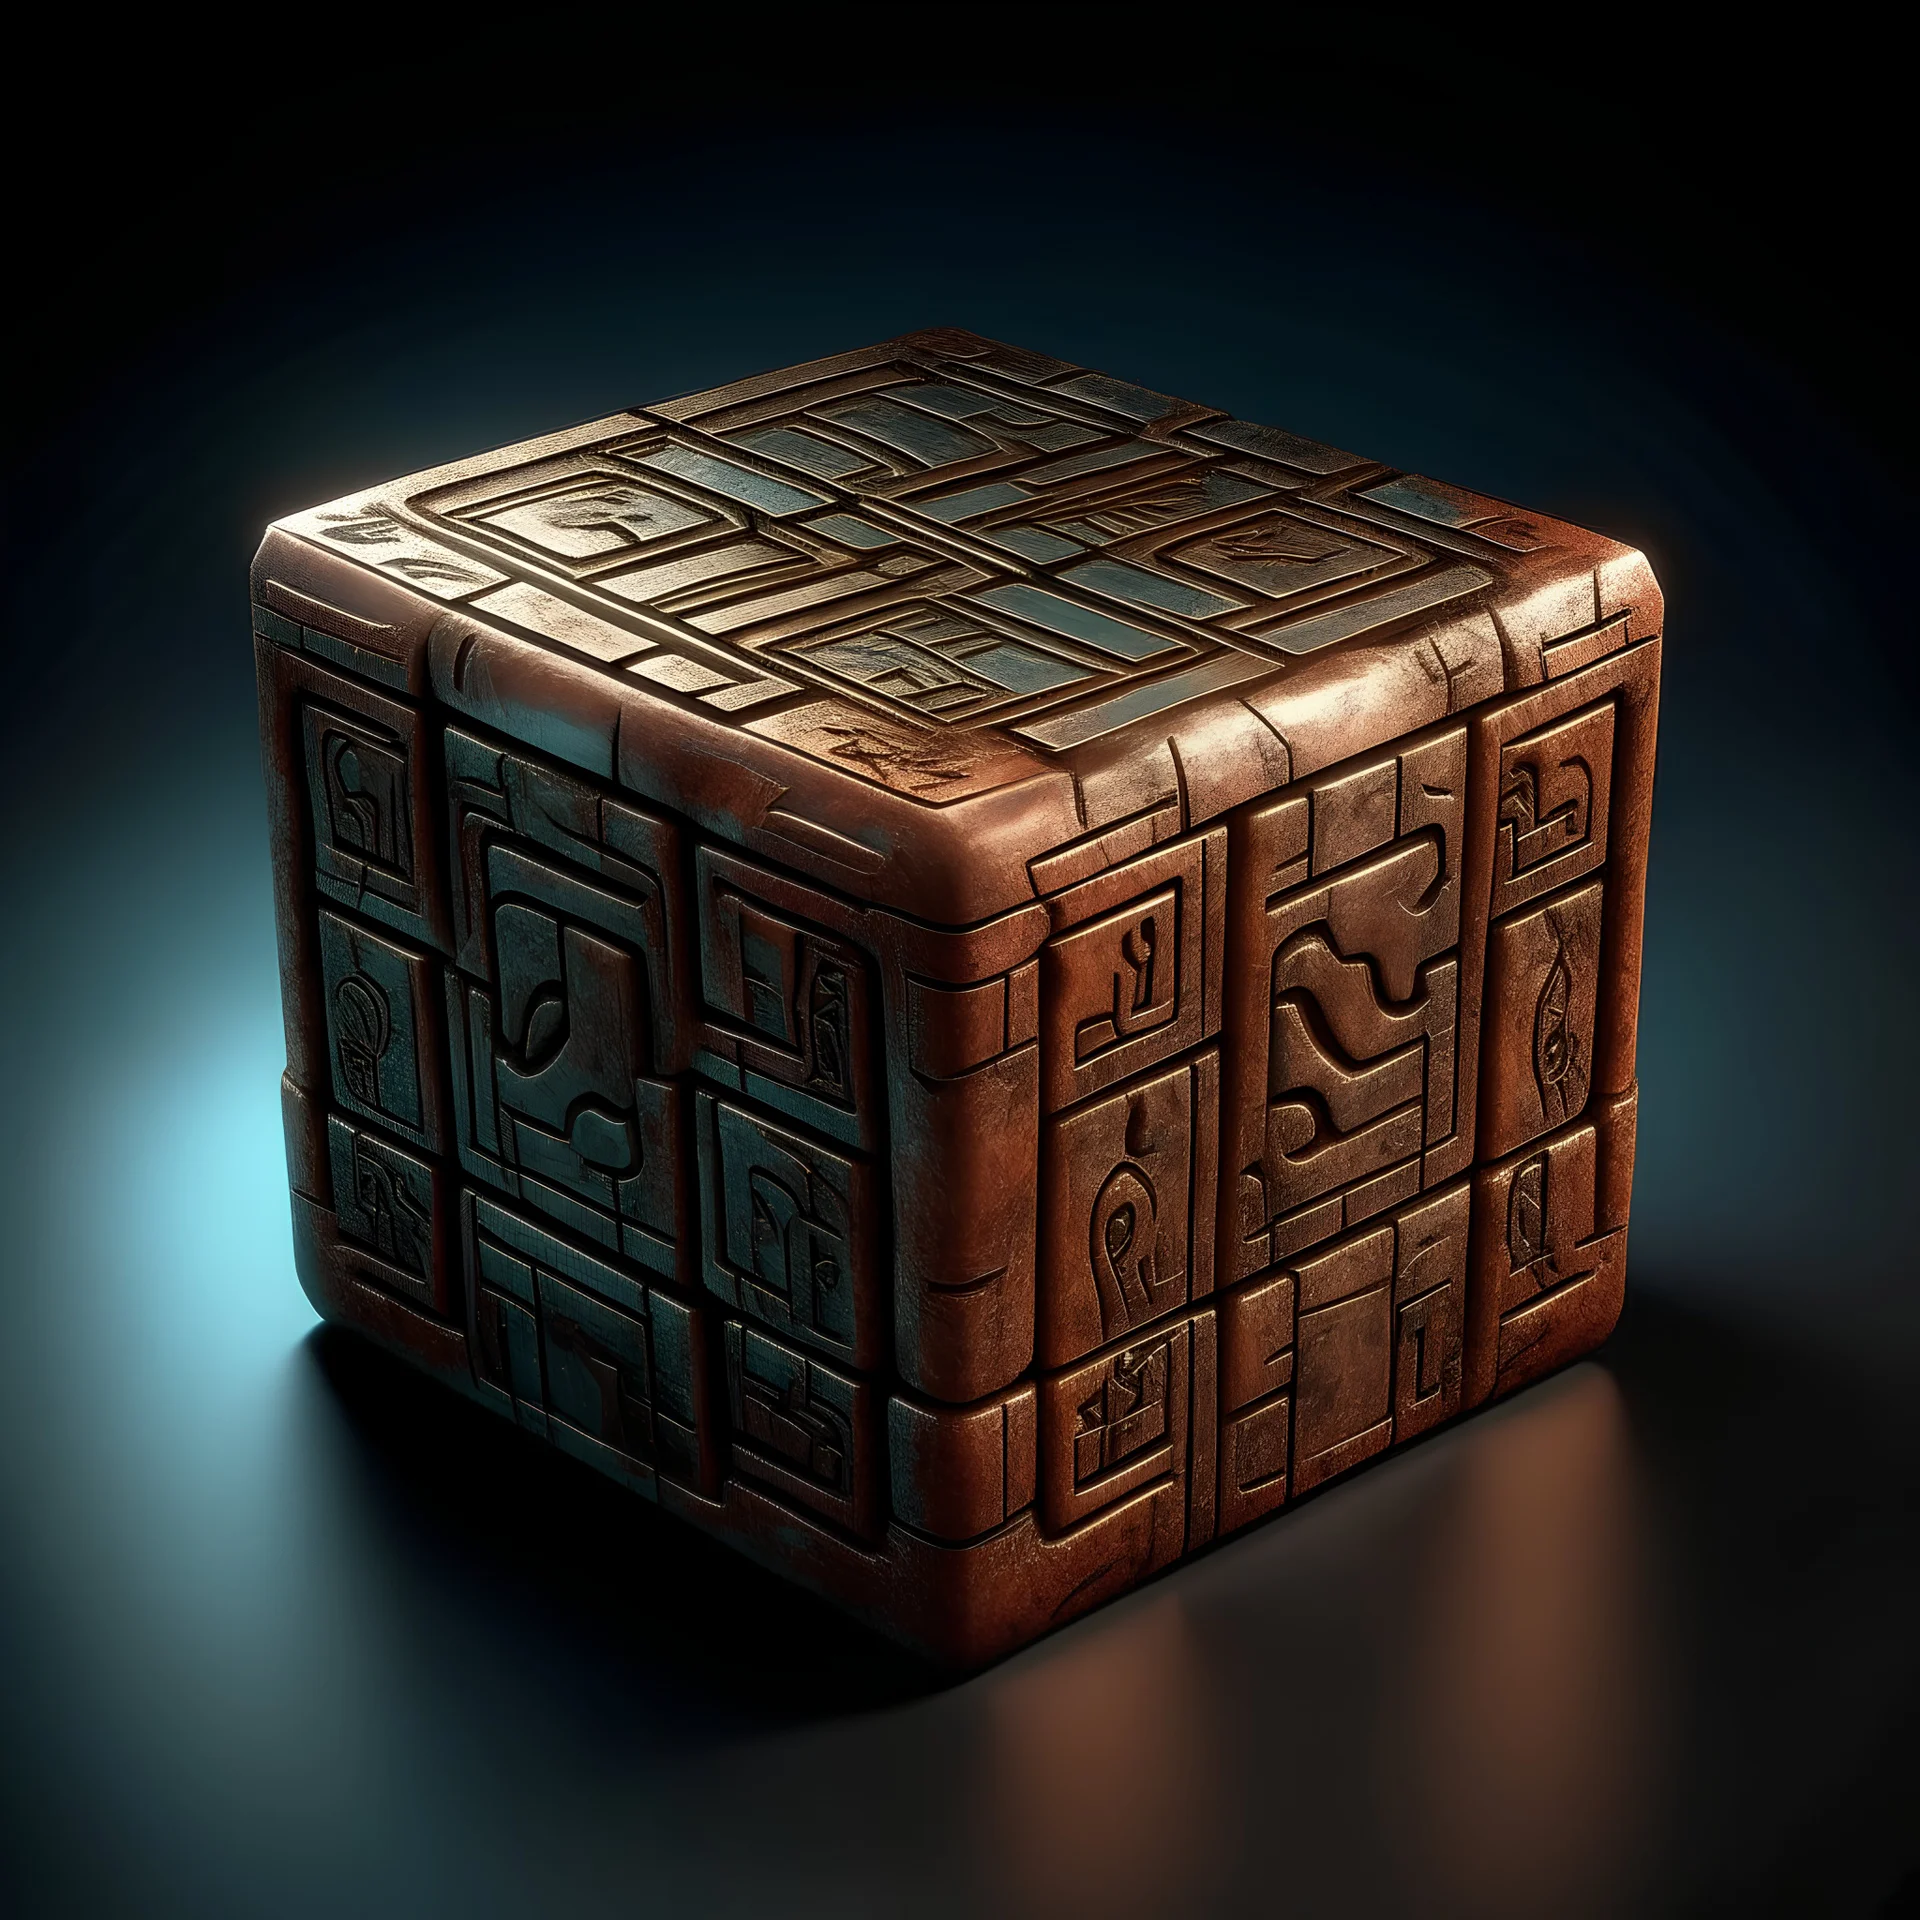 Create an image of old copper cube with strange runes